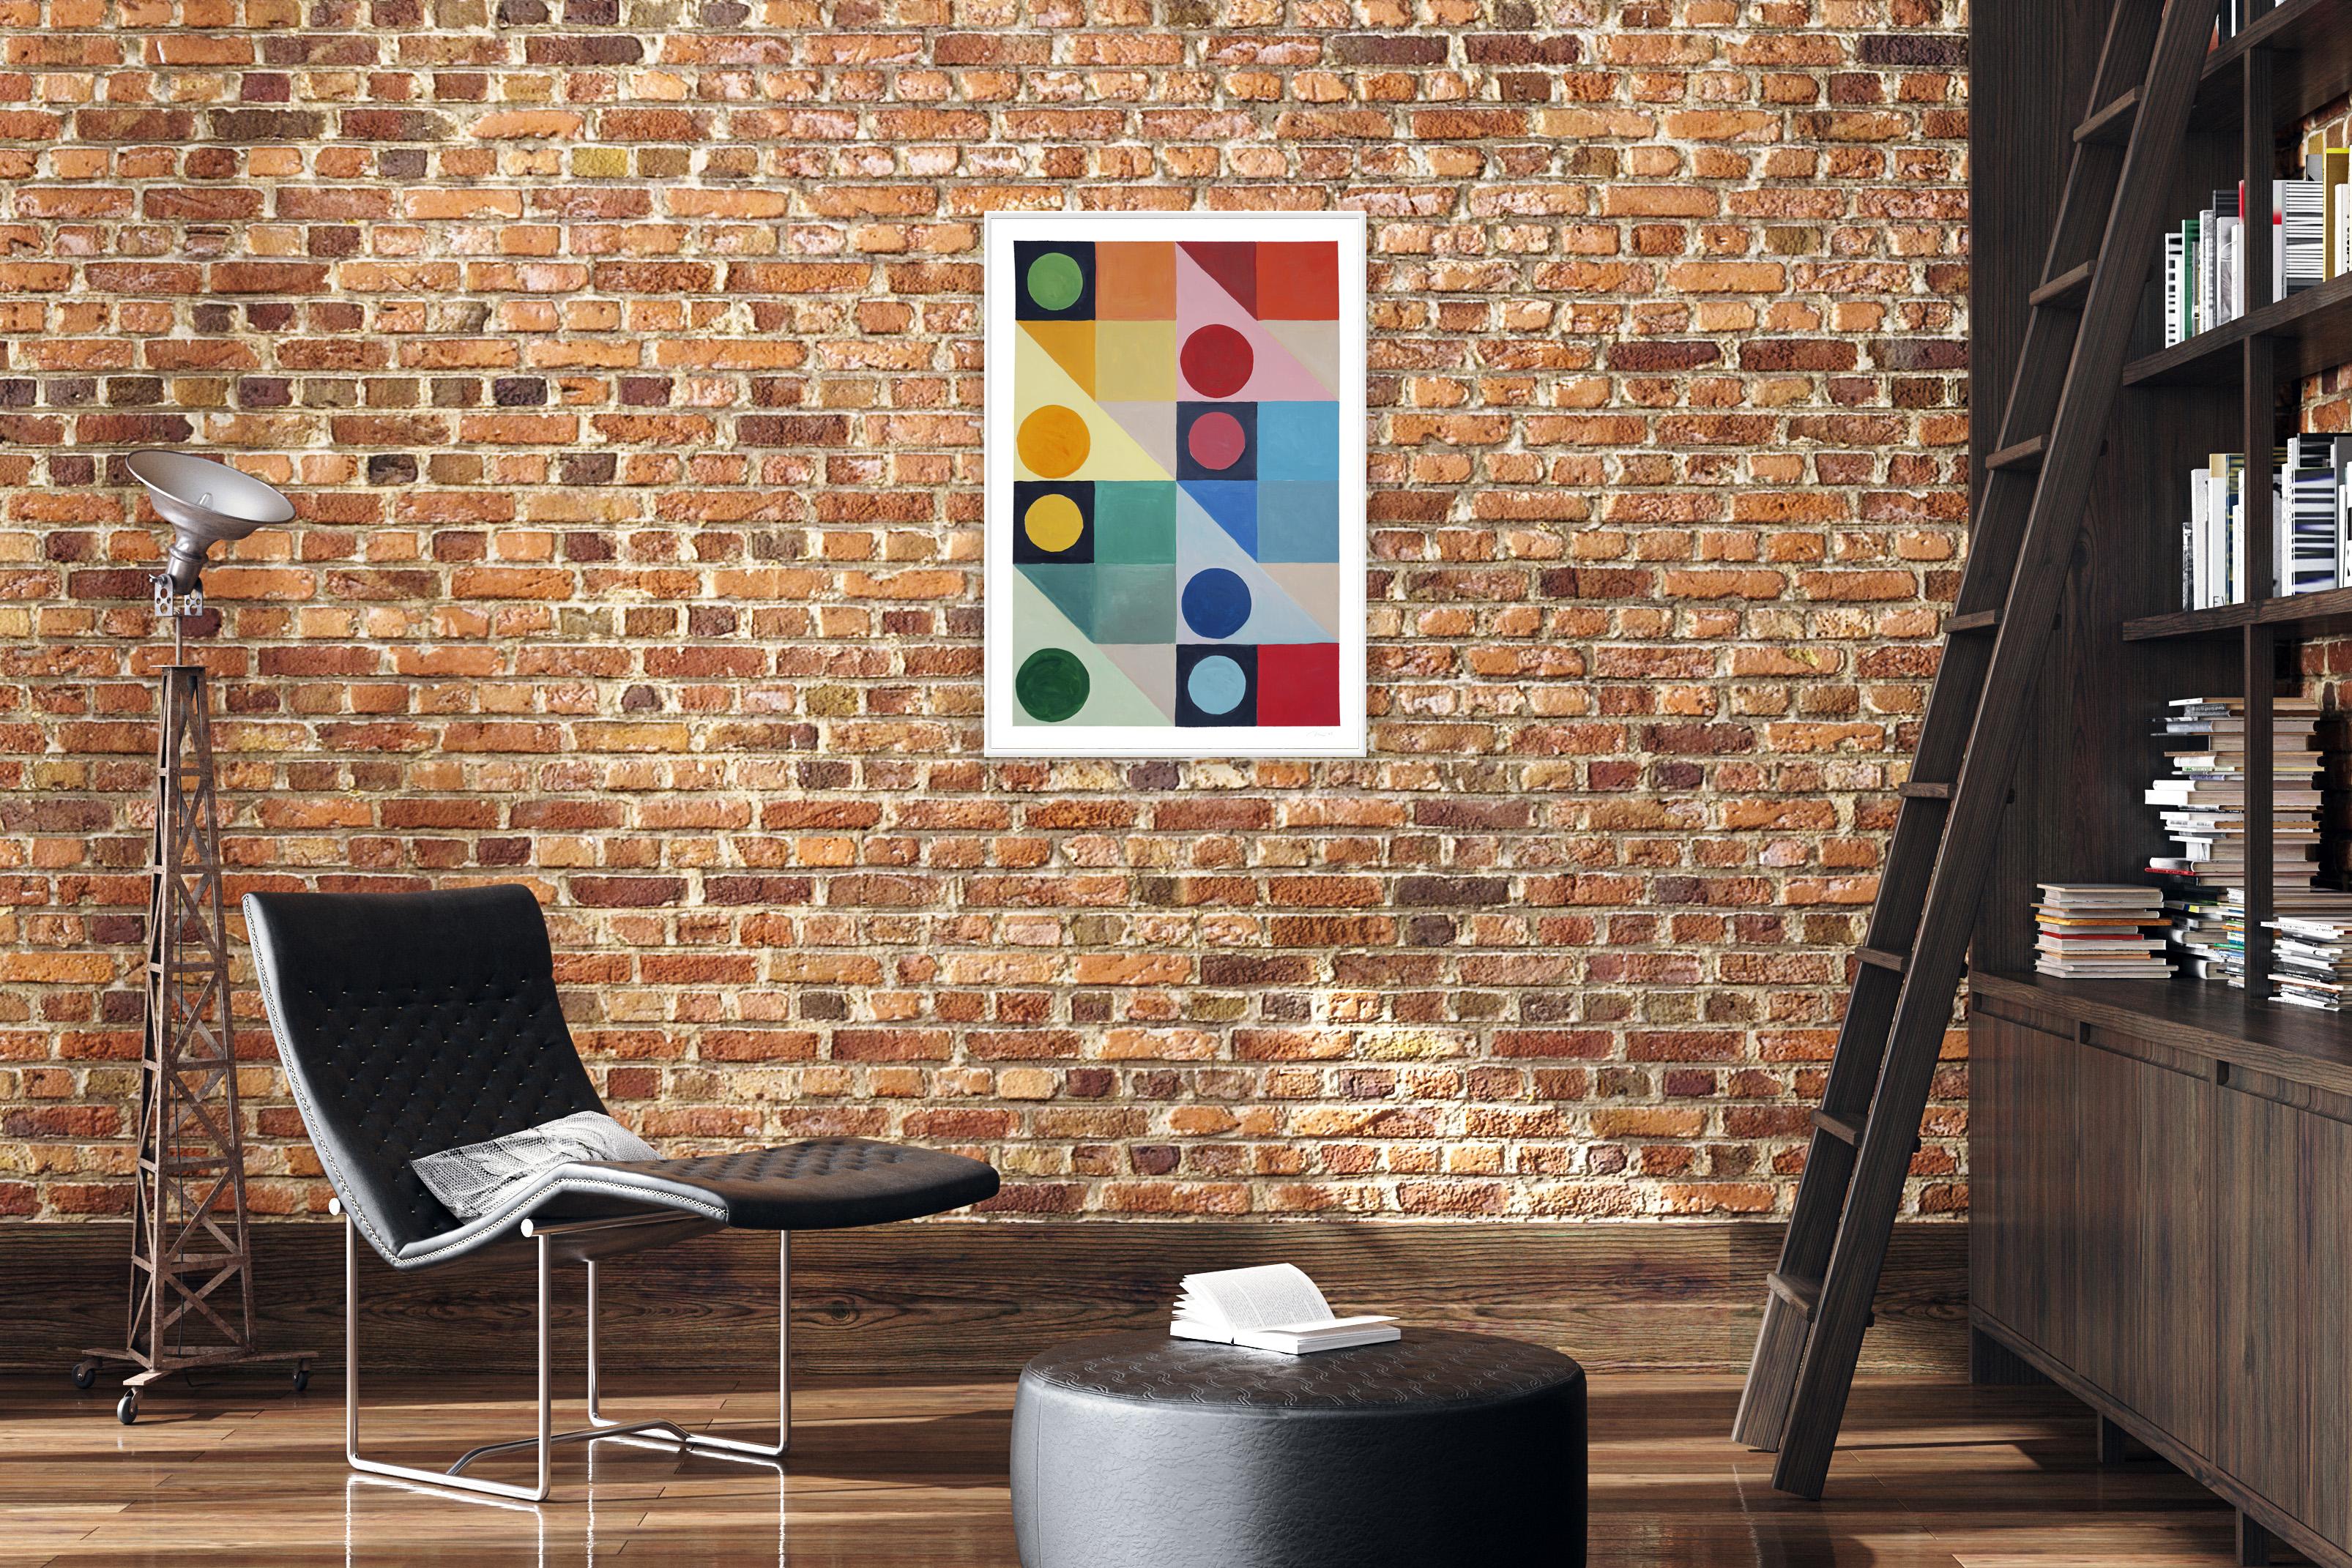 Primary Tones Geometric Rainbow, Vertical CMYK and Circles Squares, Red, Yellow - Beige Abstract Painting by Natalia Roman